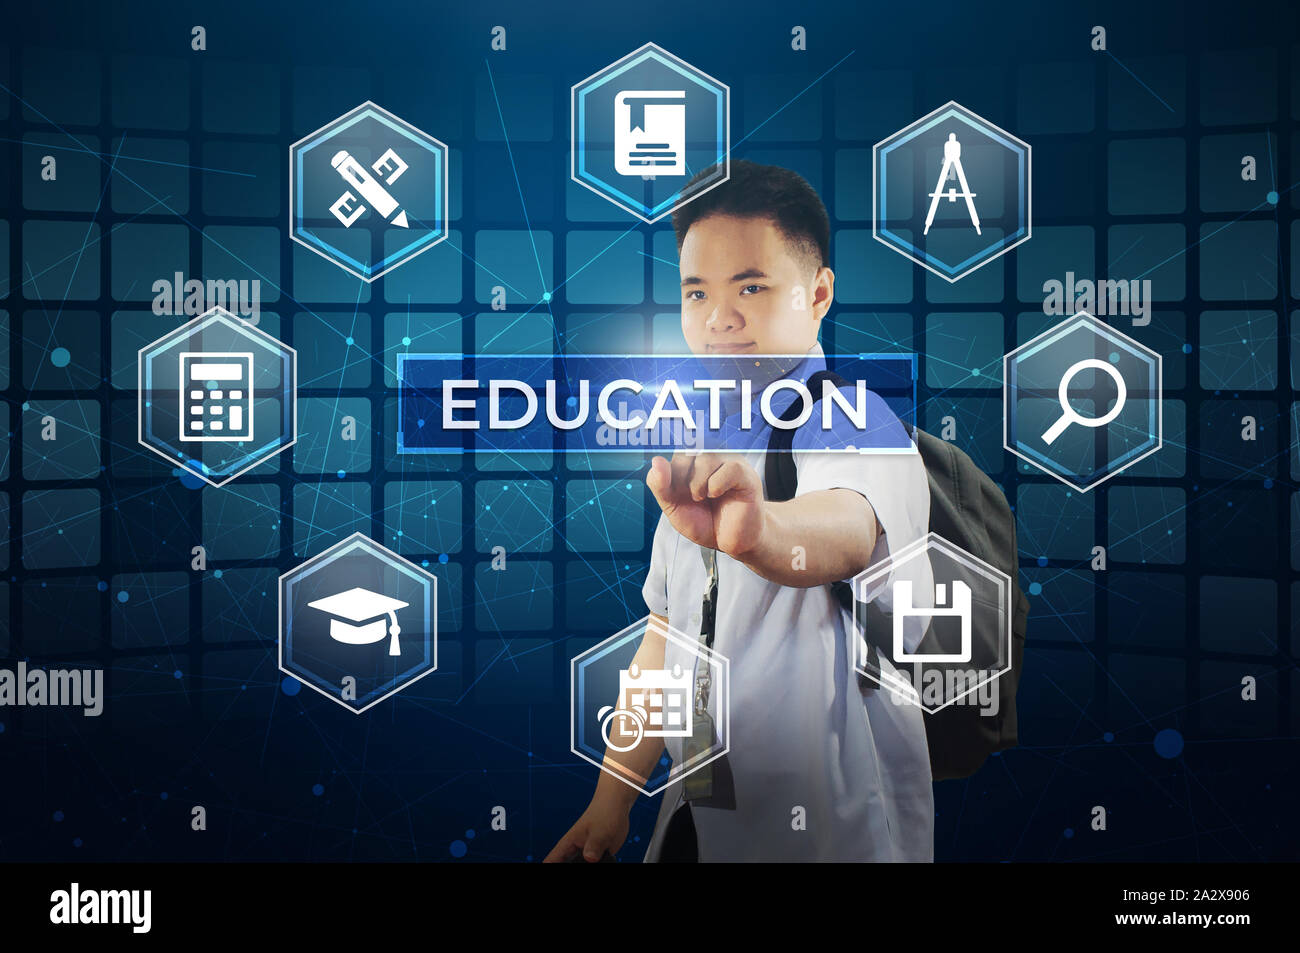 Student touching virtual screen.  Young school boy touching a hologram display screen with labelled Education with study materials icons. Stock Photo